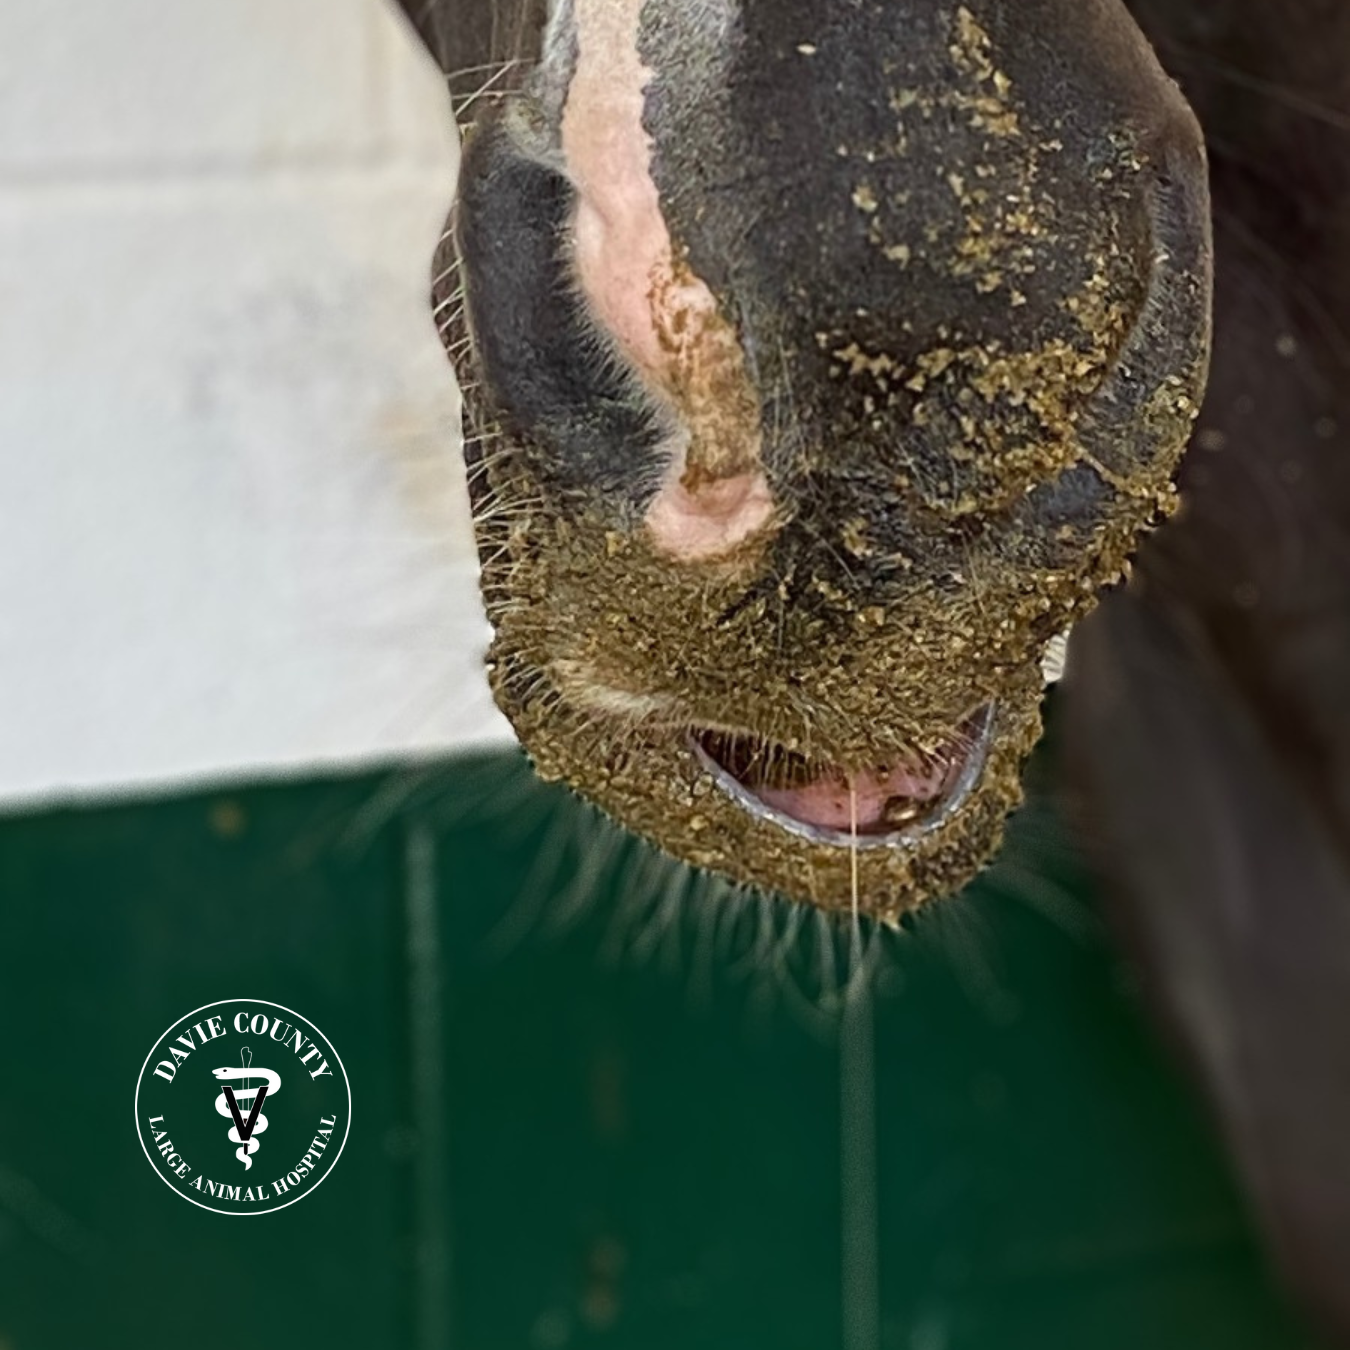 Horse with facial nerve paralysis dropping food and drooling